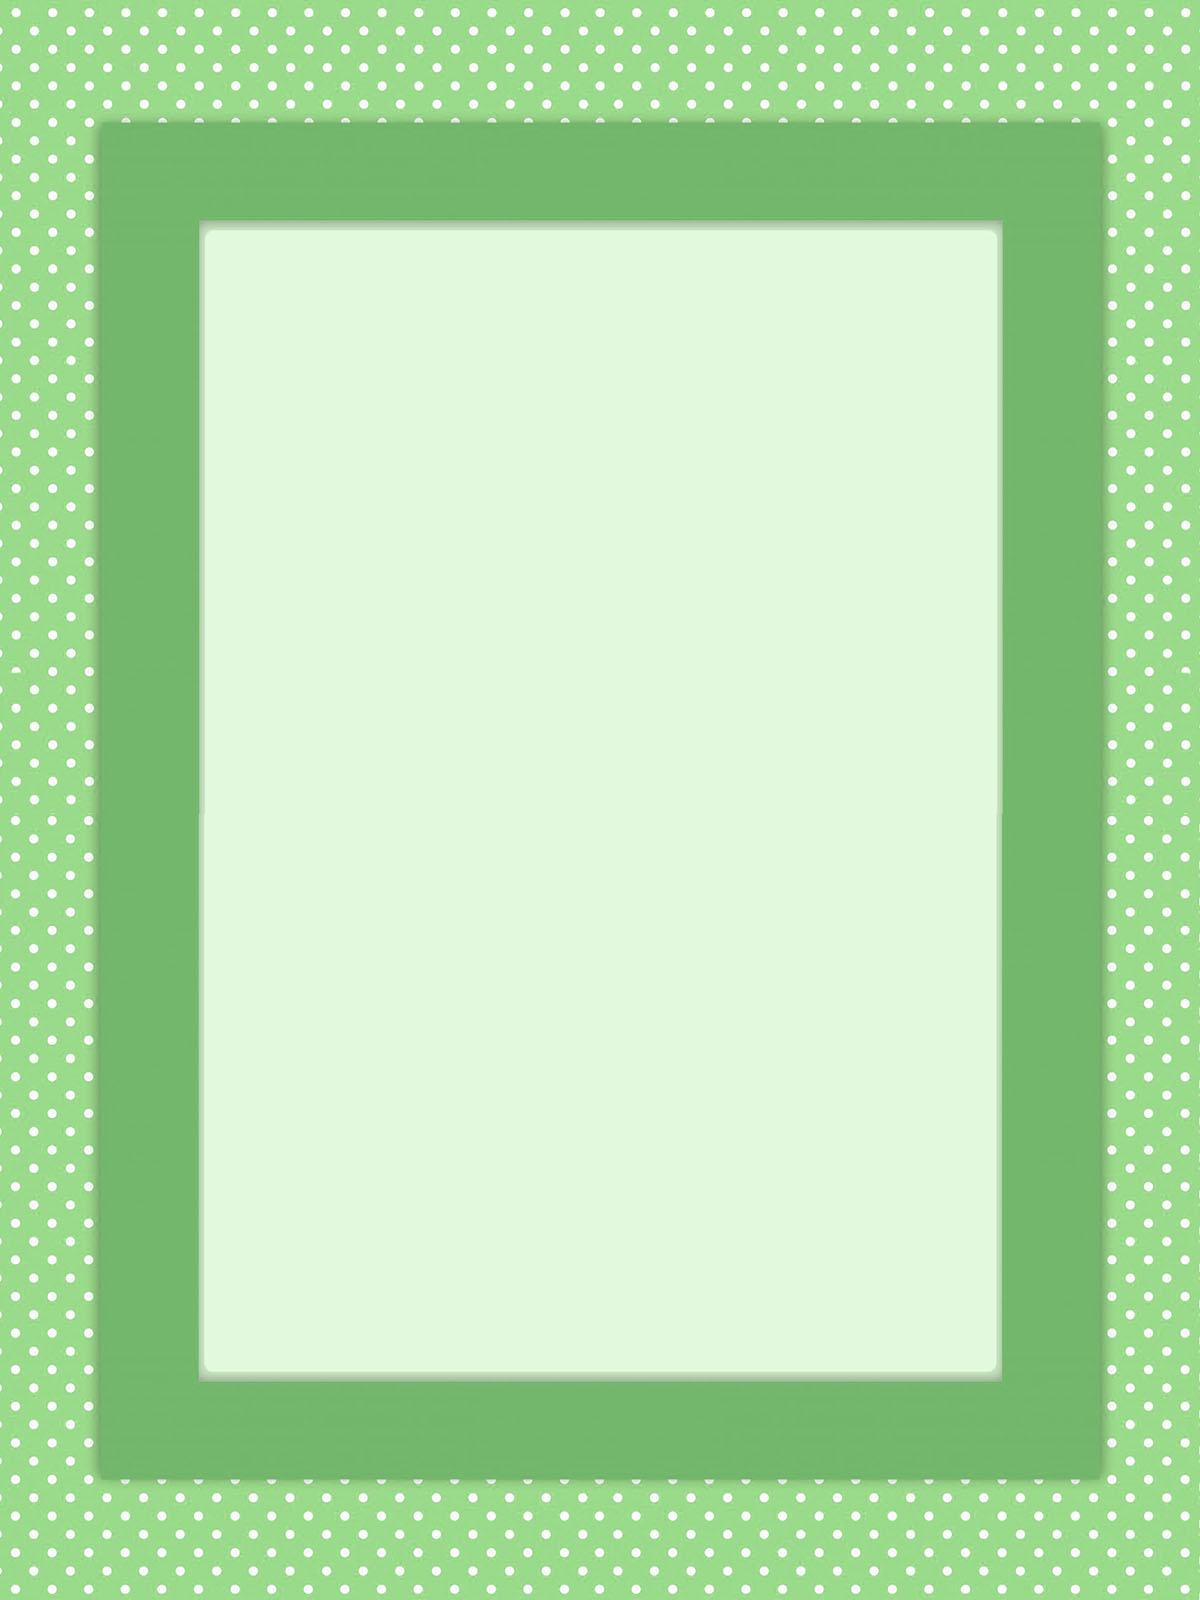 green spotted frame